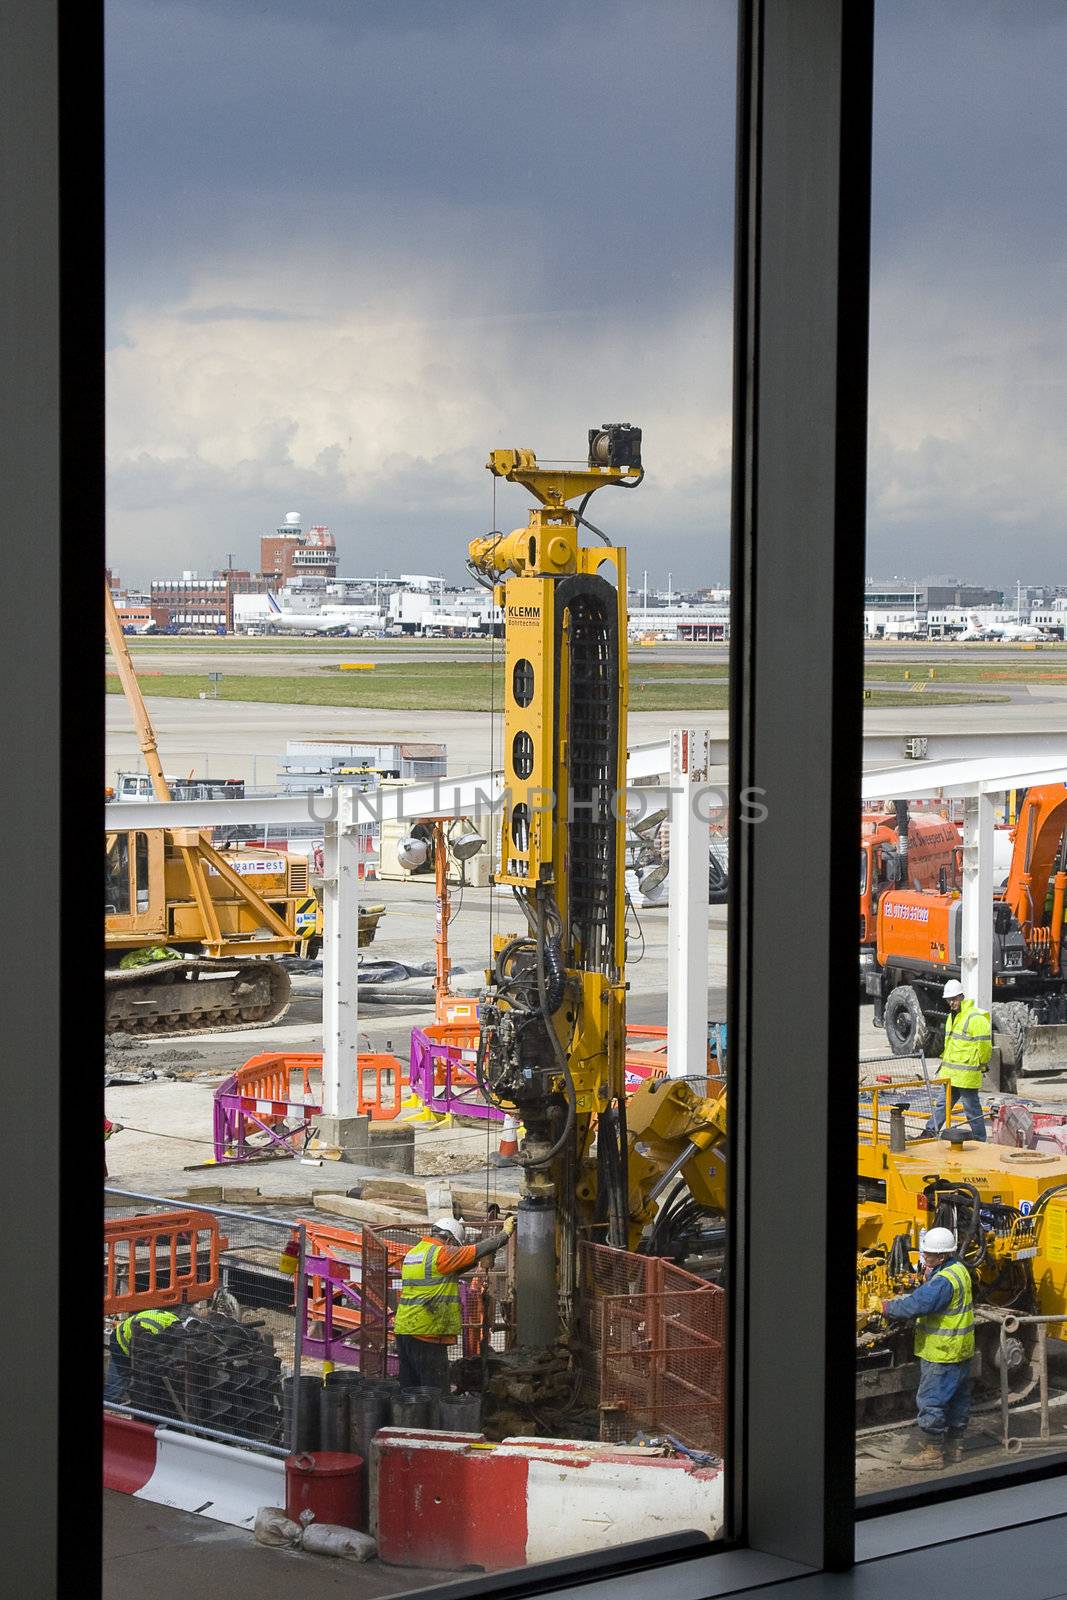 Construction commencing at London Heathrow airport, one of the busiest airports in the world, it's always in desperate need of expansion. 